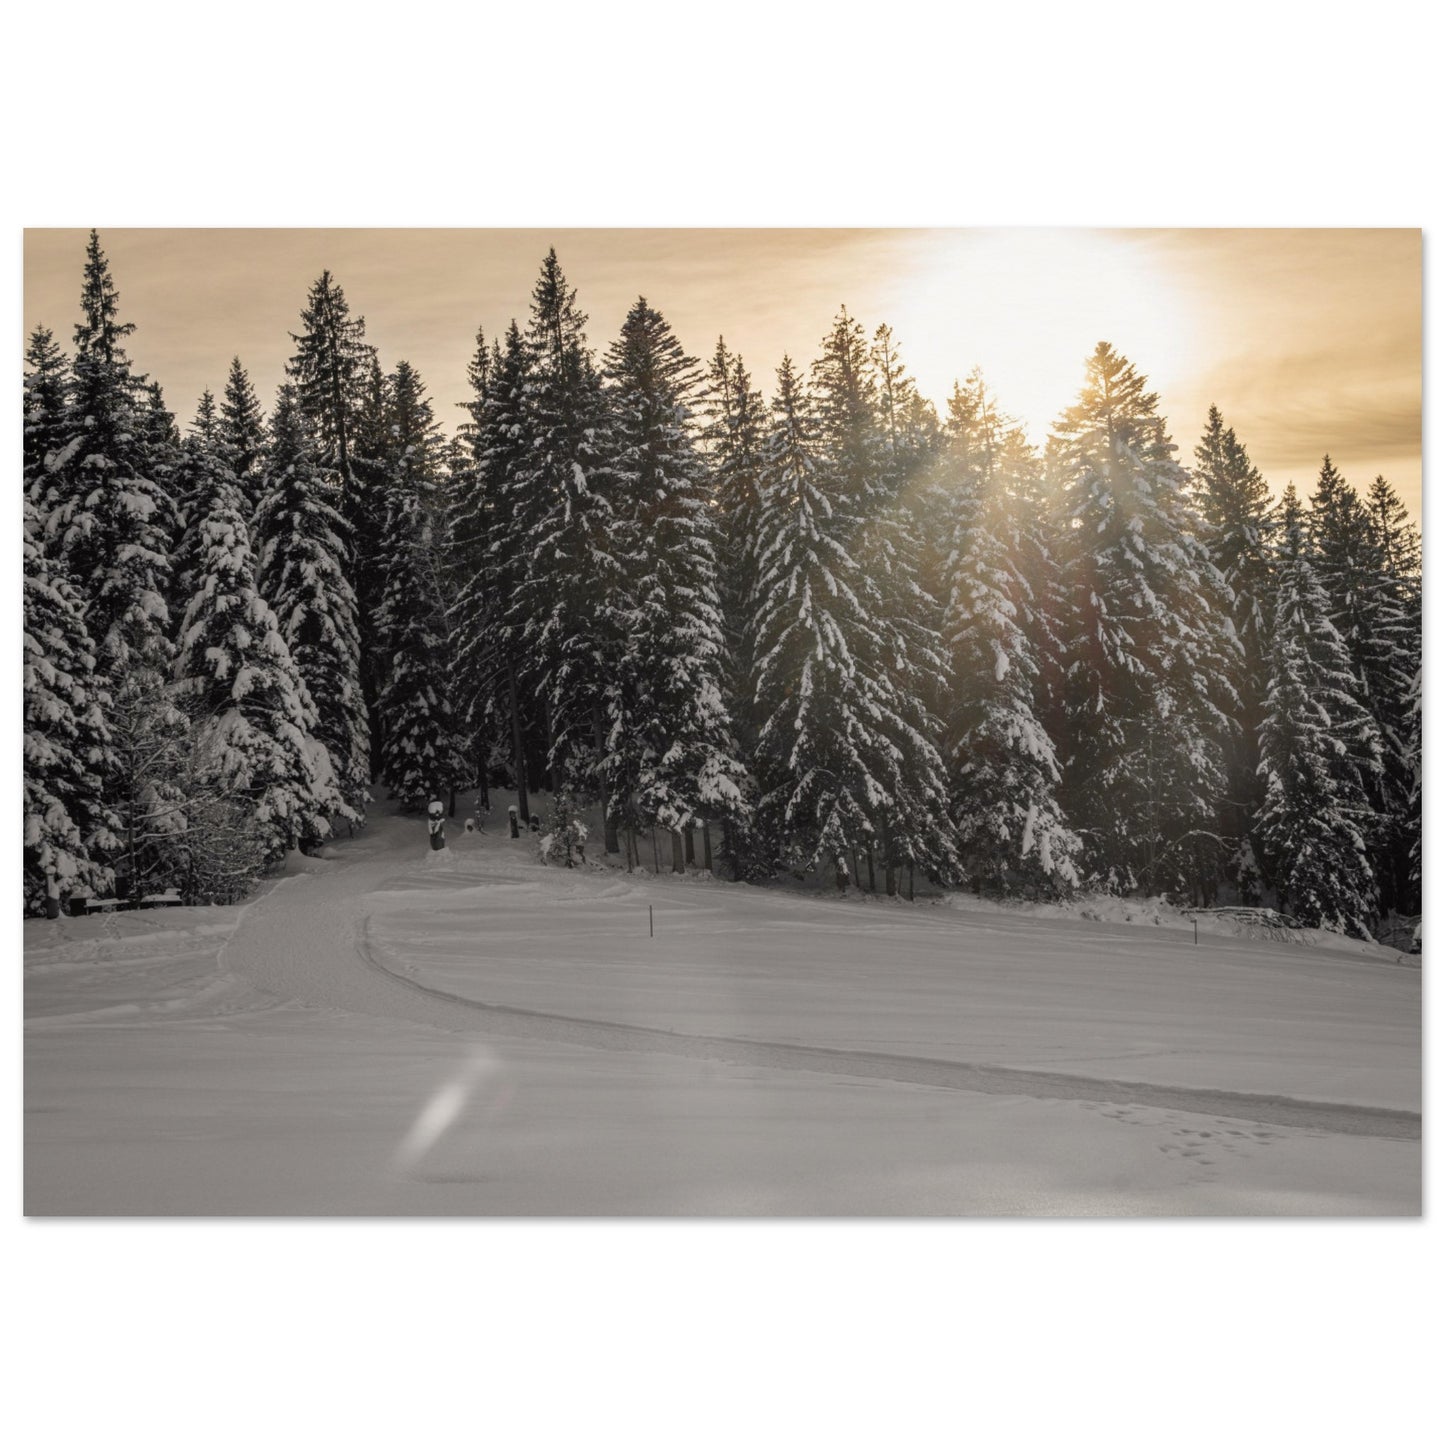 Sun rays over snowy forest - Premium Poster 